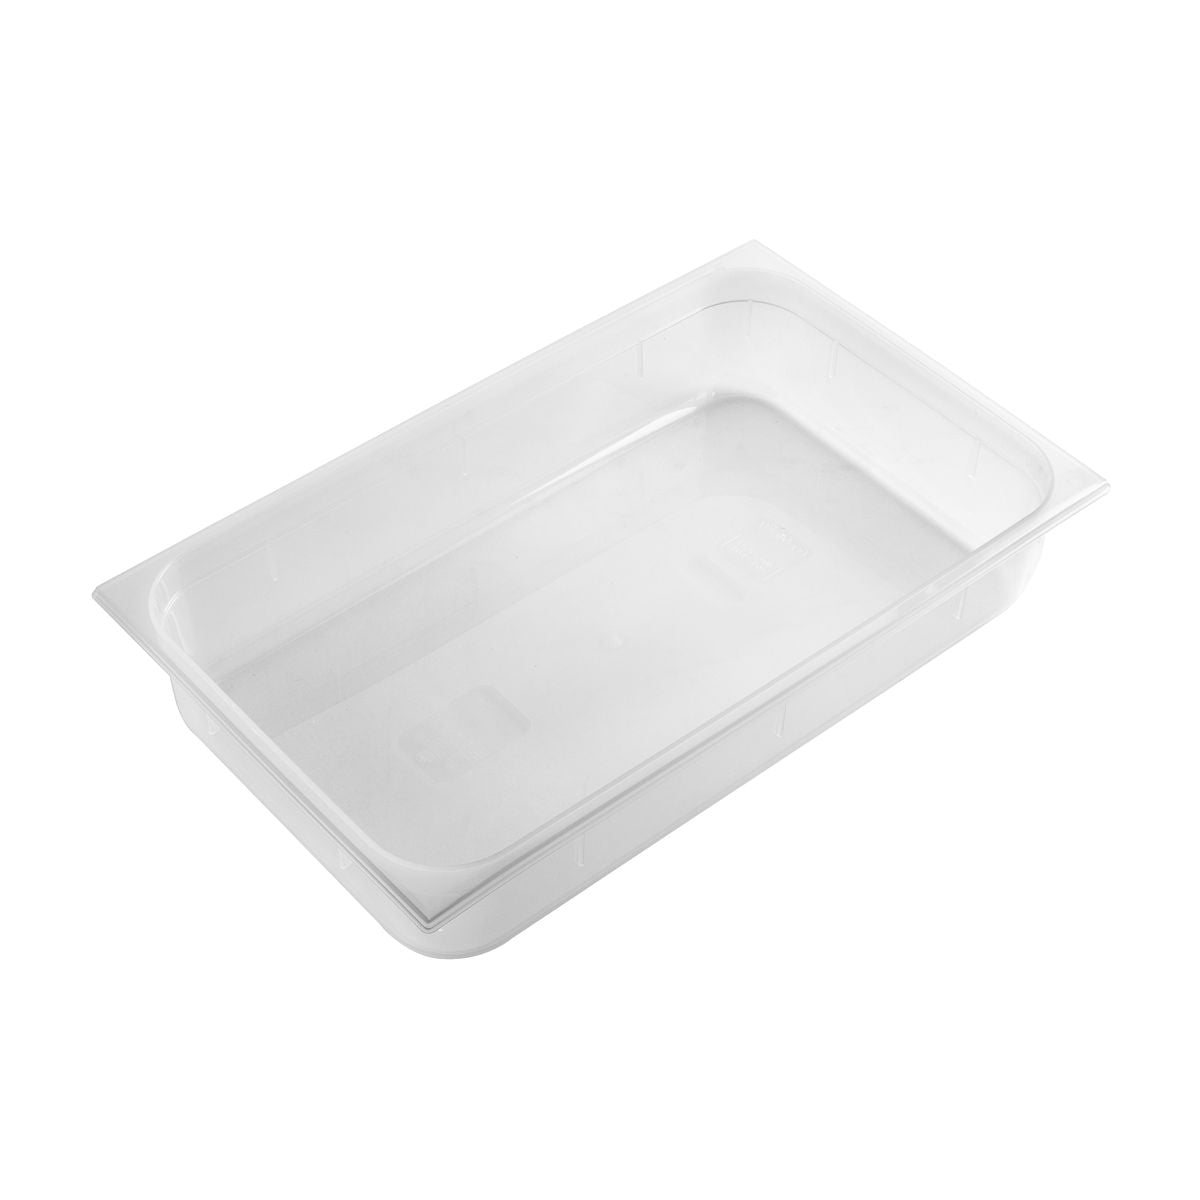 Gastronorm Pan - 150mm, Size 1-1 , Polypropylene: Pack of 1